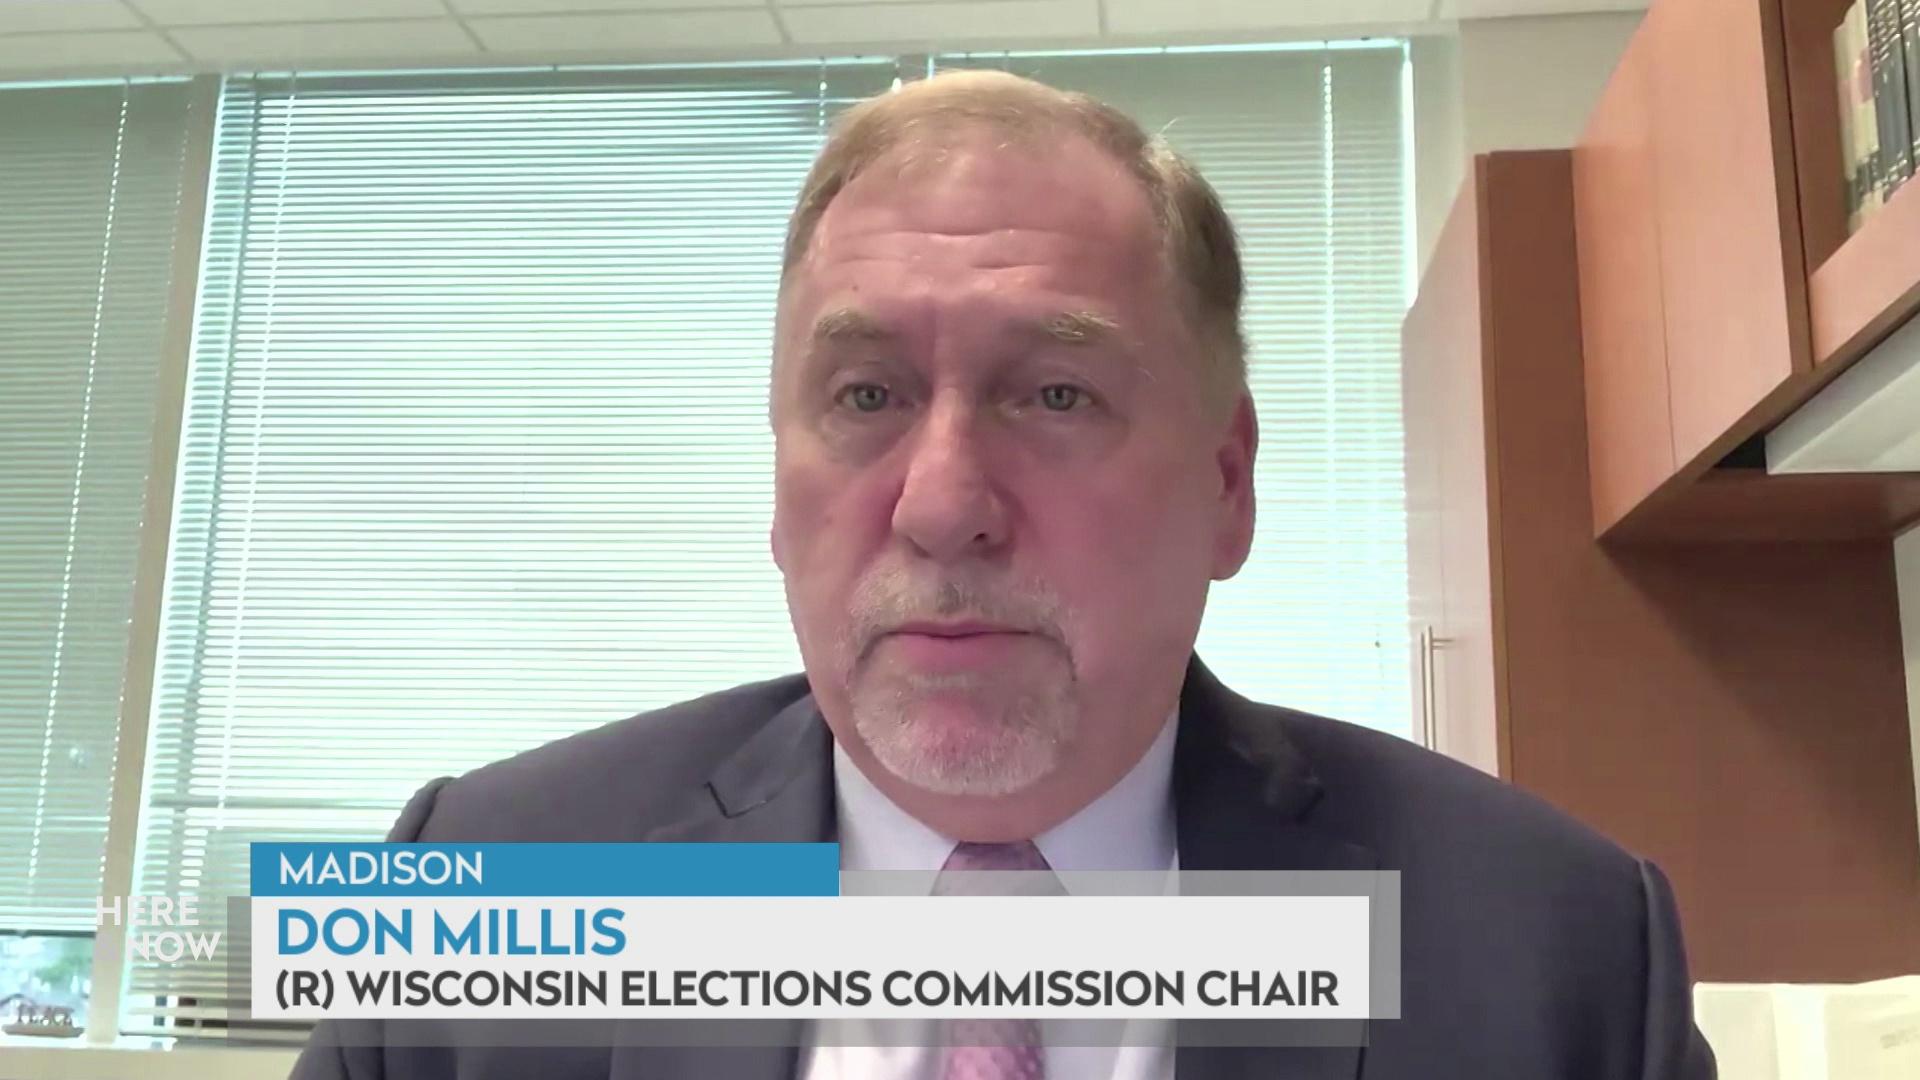 A still image from a video shows Don Millis seated in front of wooden cabinets and a window with blinds, with a graphic at bottom reading 'Madison,' 'Don Millis' and '(R) Wisconsin Elections Commission Chair.'